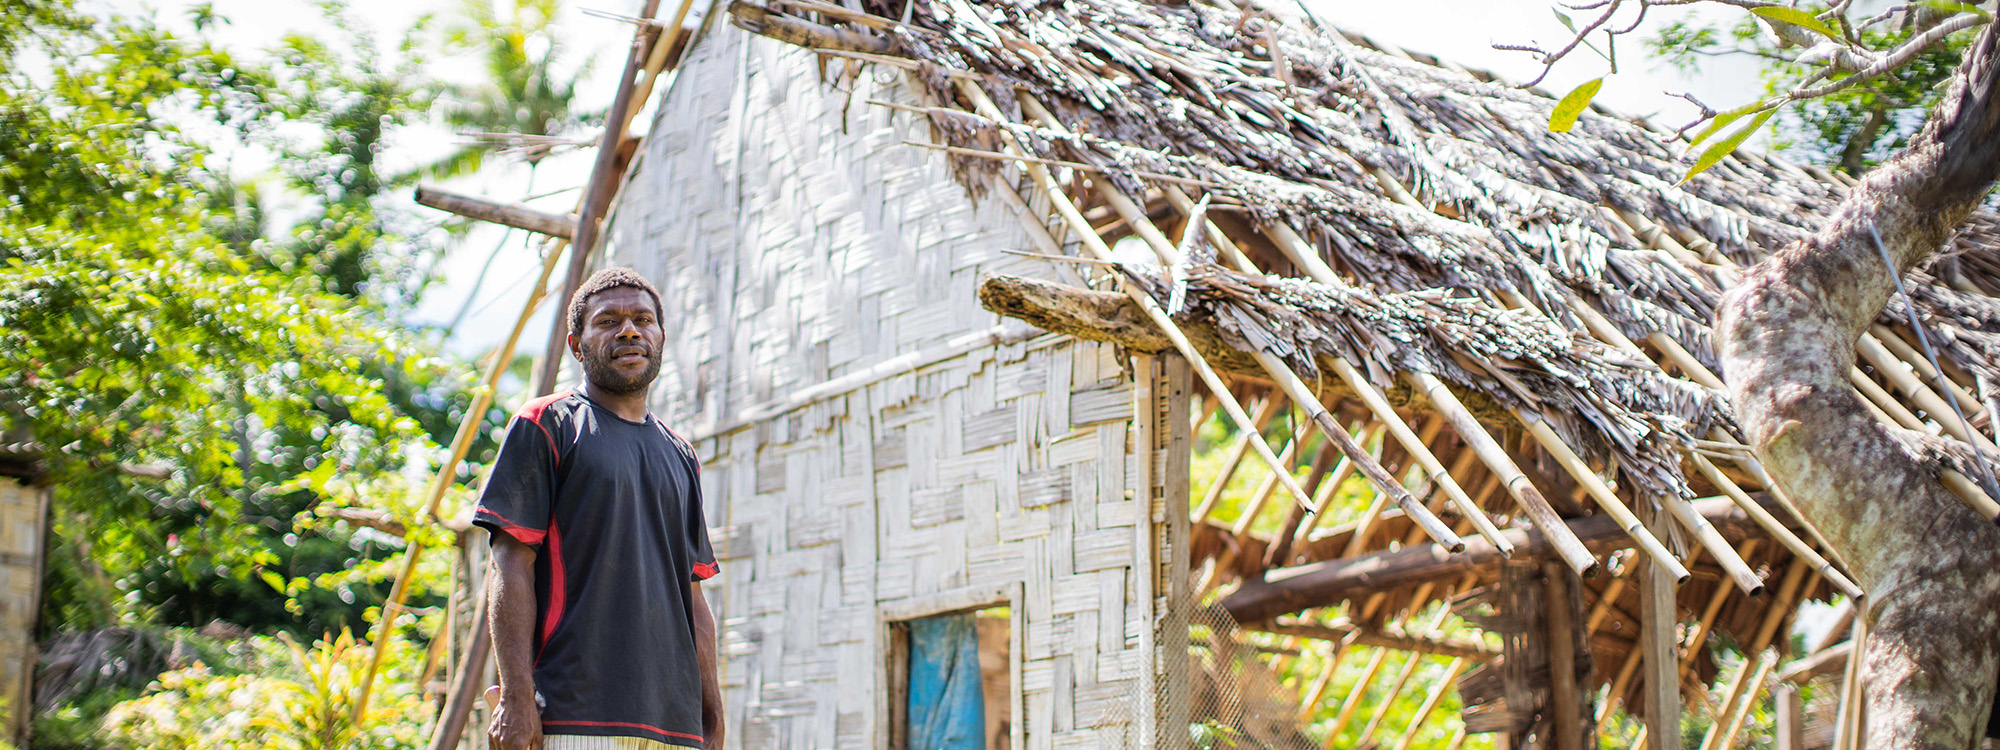 Man standing outside a building damaged by a cyclone in Vanuatu